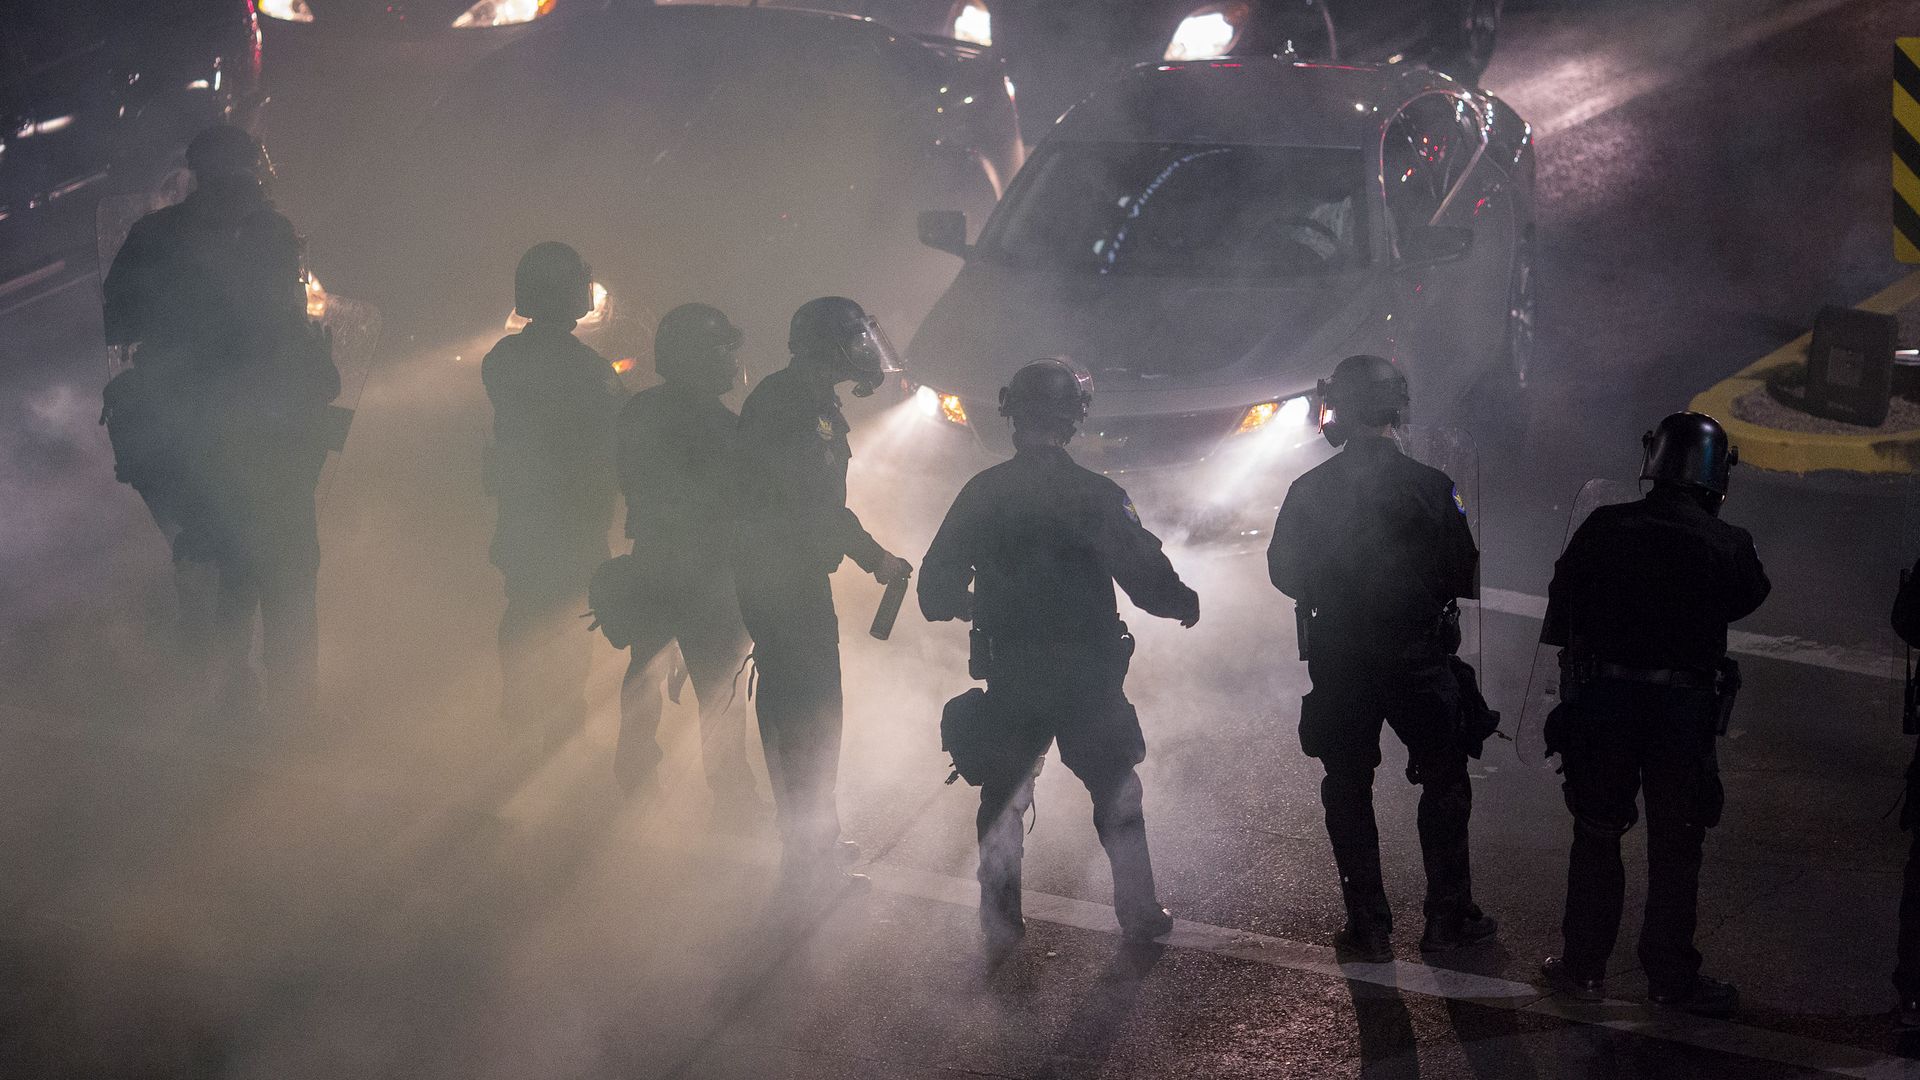 Smoke and tear gas fills the air around trapped drivers as police advance upon demonstrators after a rally by President Donald Trump at the Phoenix Convention Center.